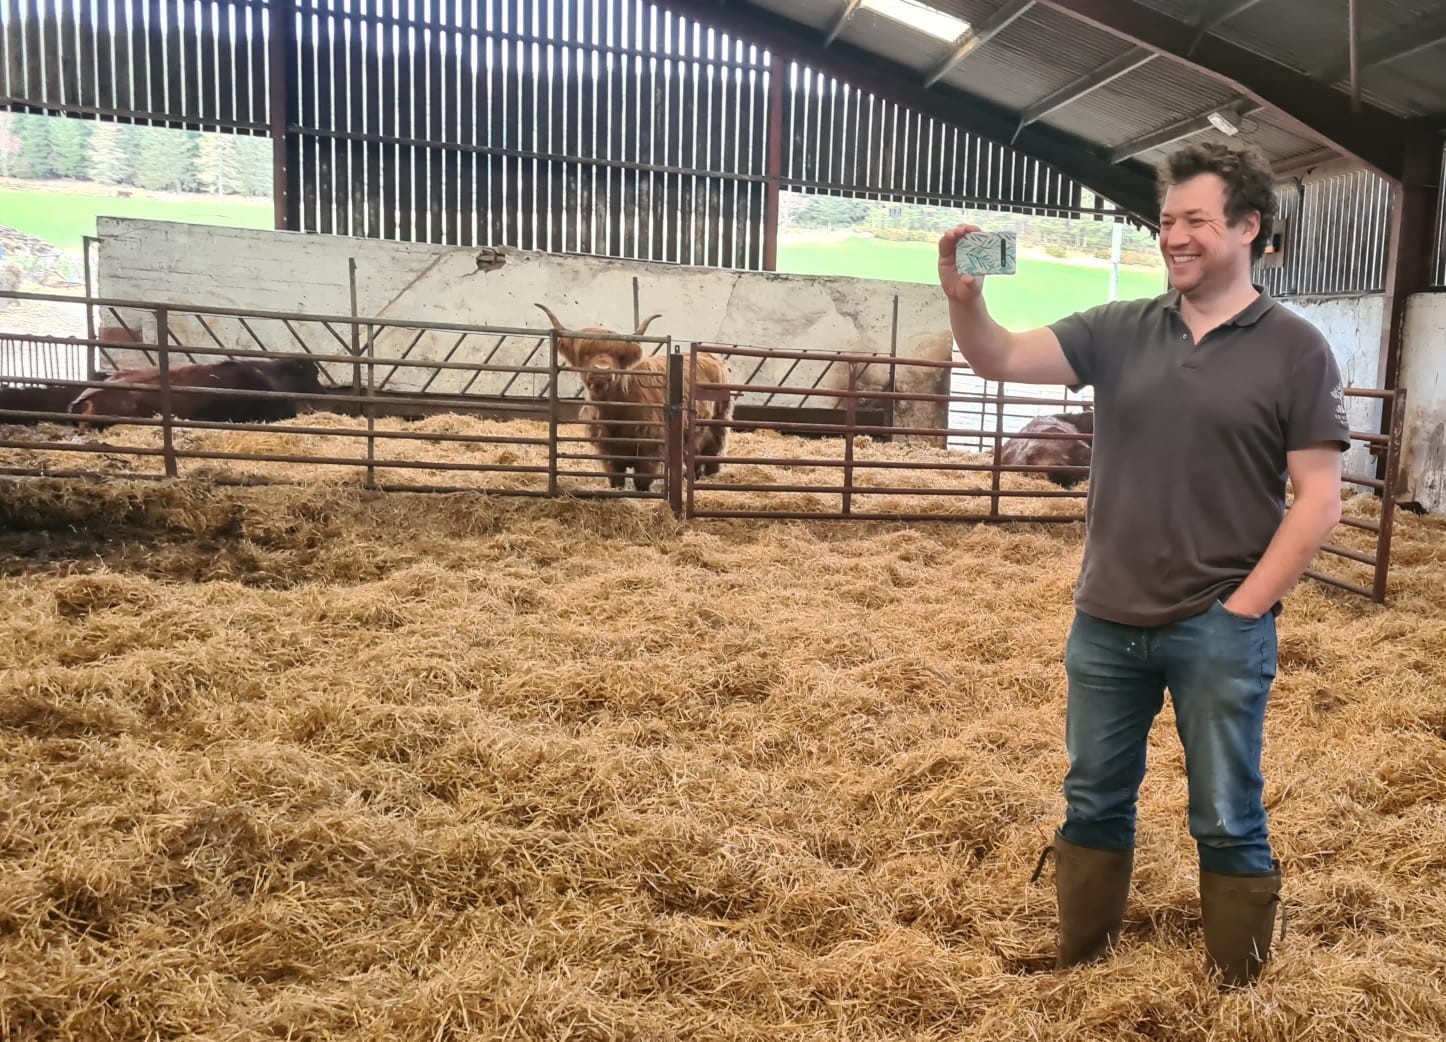 Farmer Jock taking his London pupils inside the cattle sheds to learn about calving